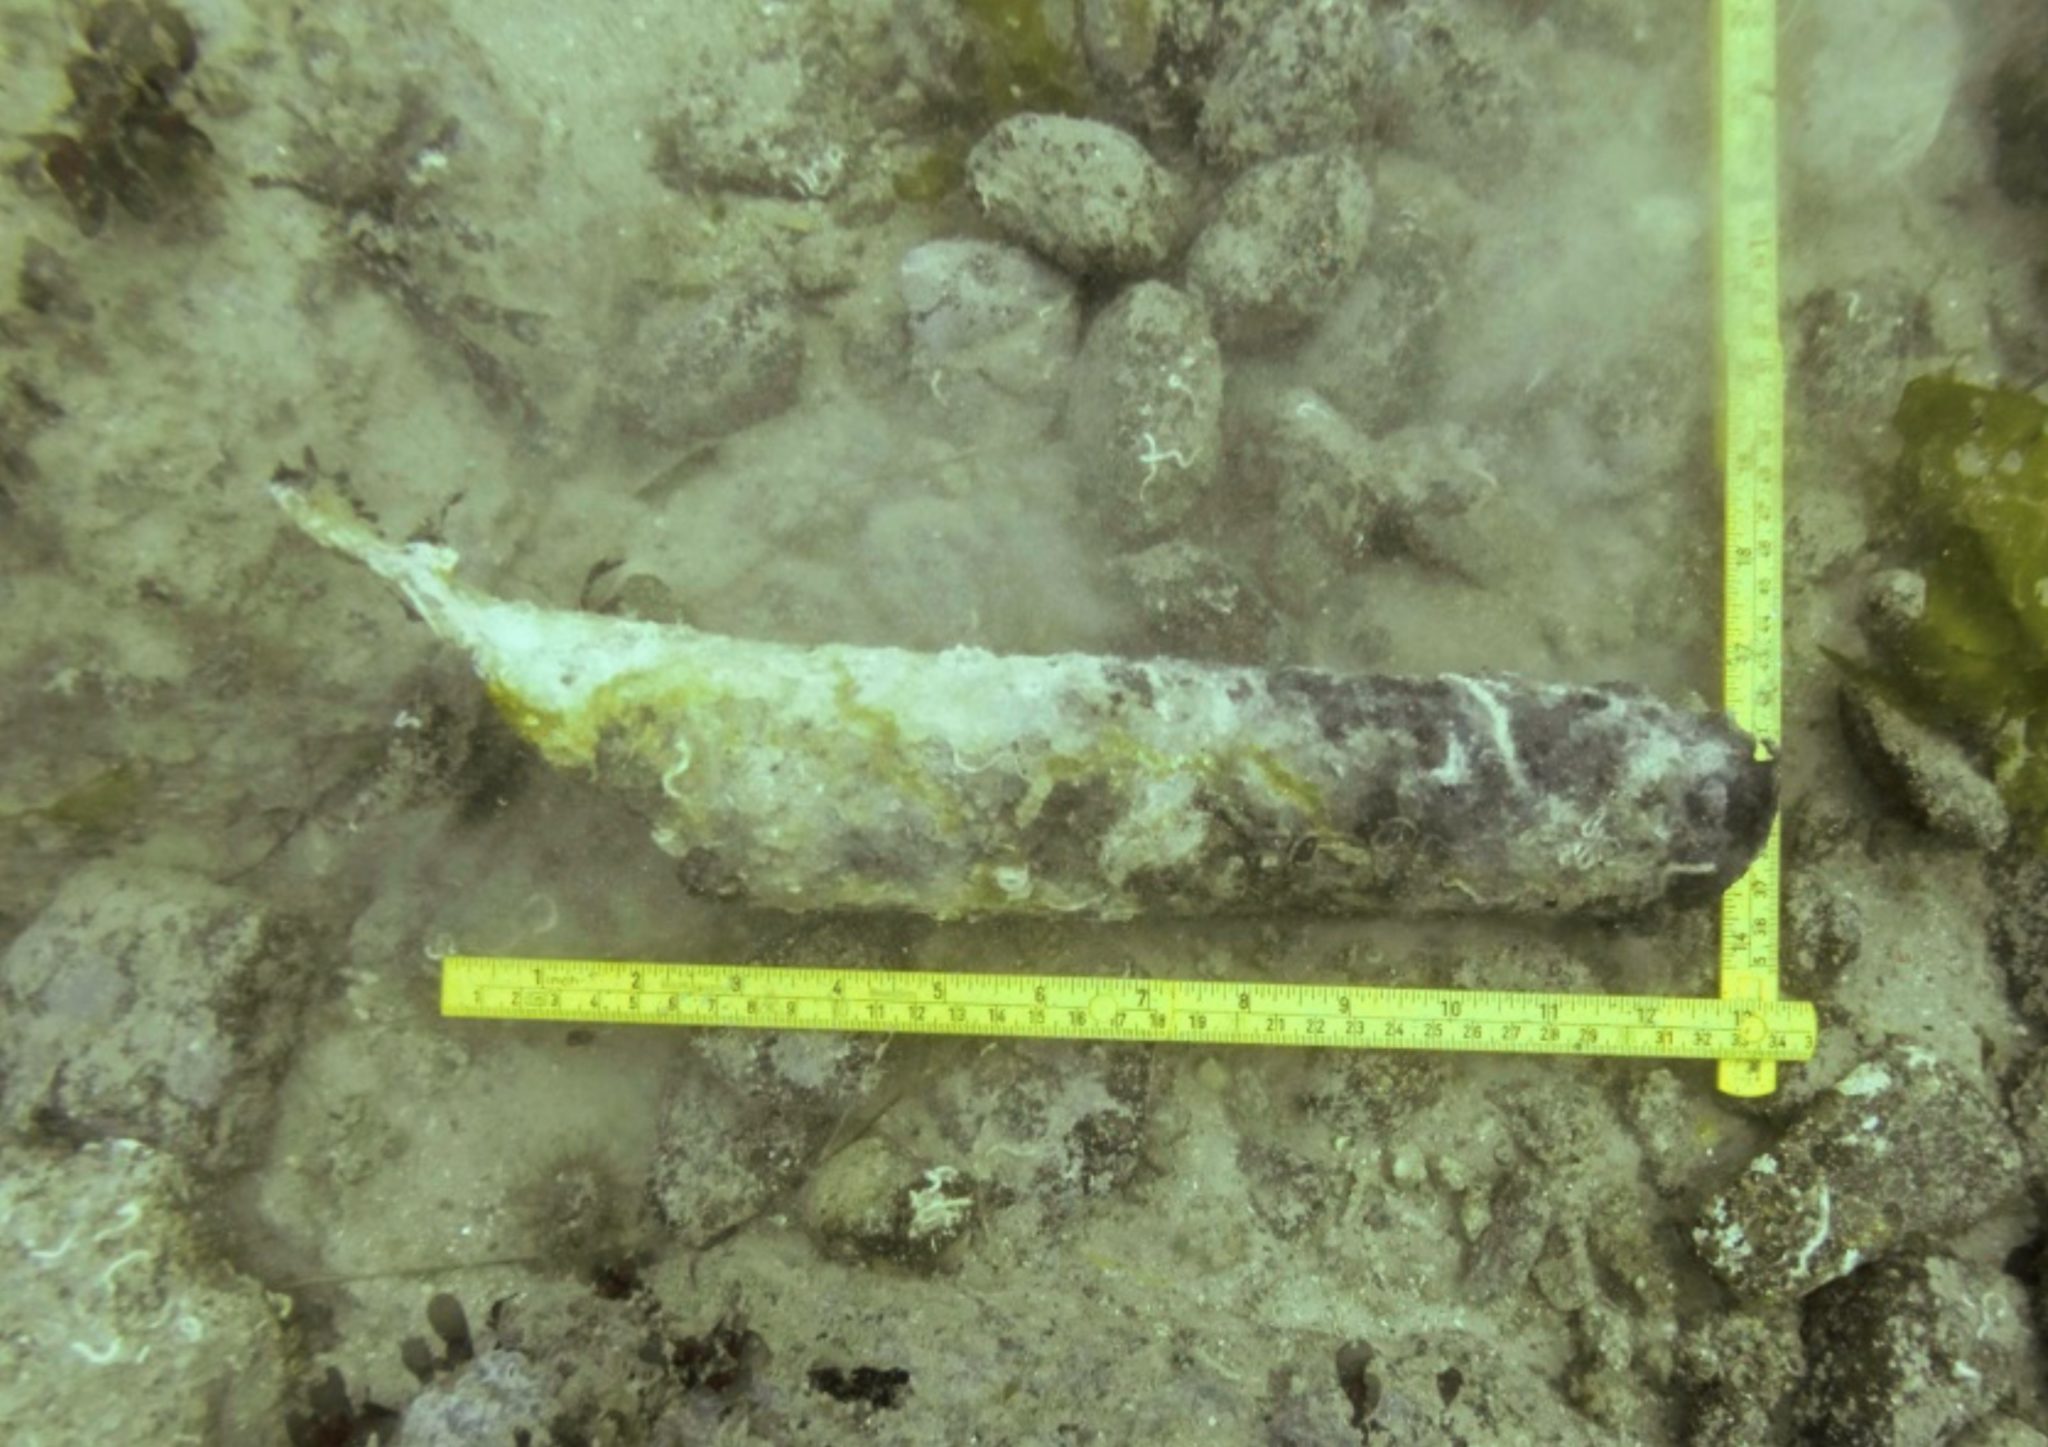 Underwater photo of lead scupper (O4) situated on the seabed some 3.5m to the south of the cargo mound. A ruler is included for scale indicating a rough size of 40cm.